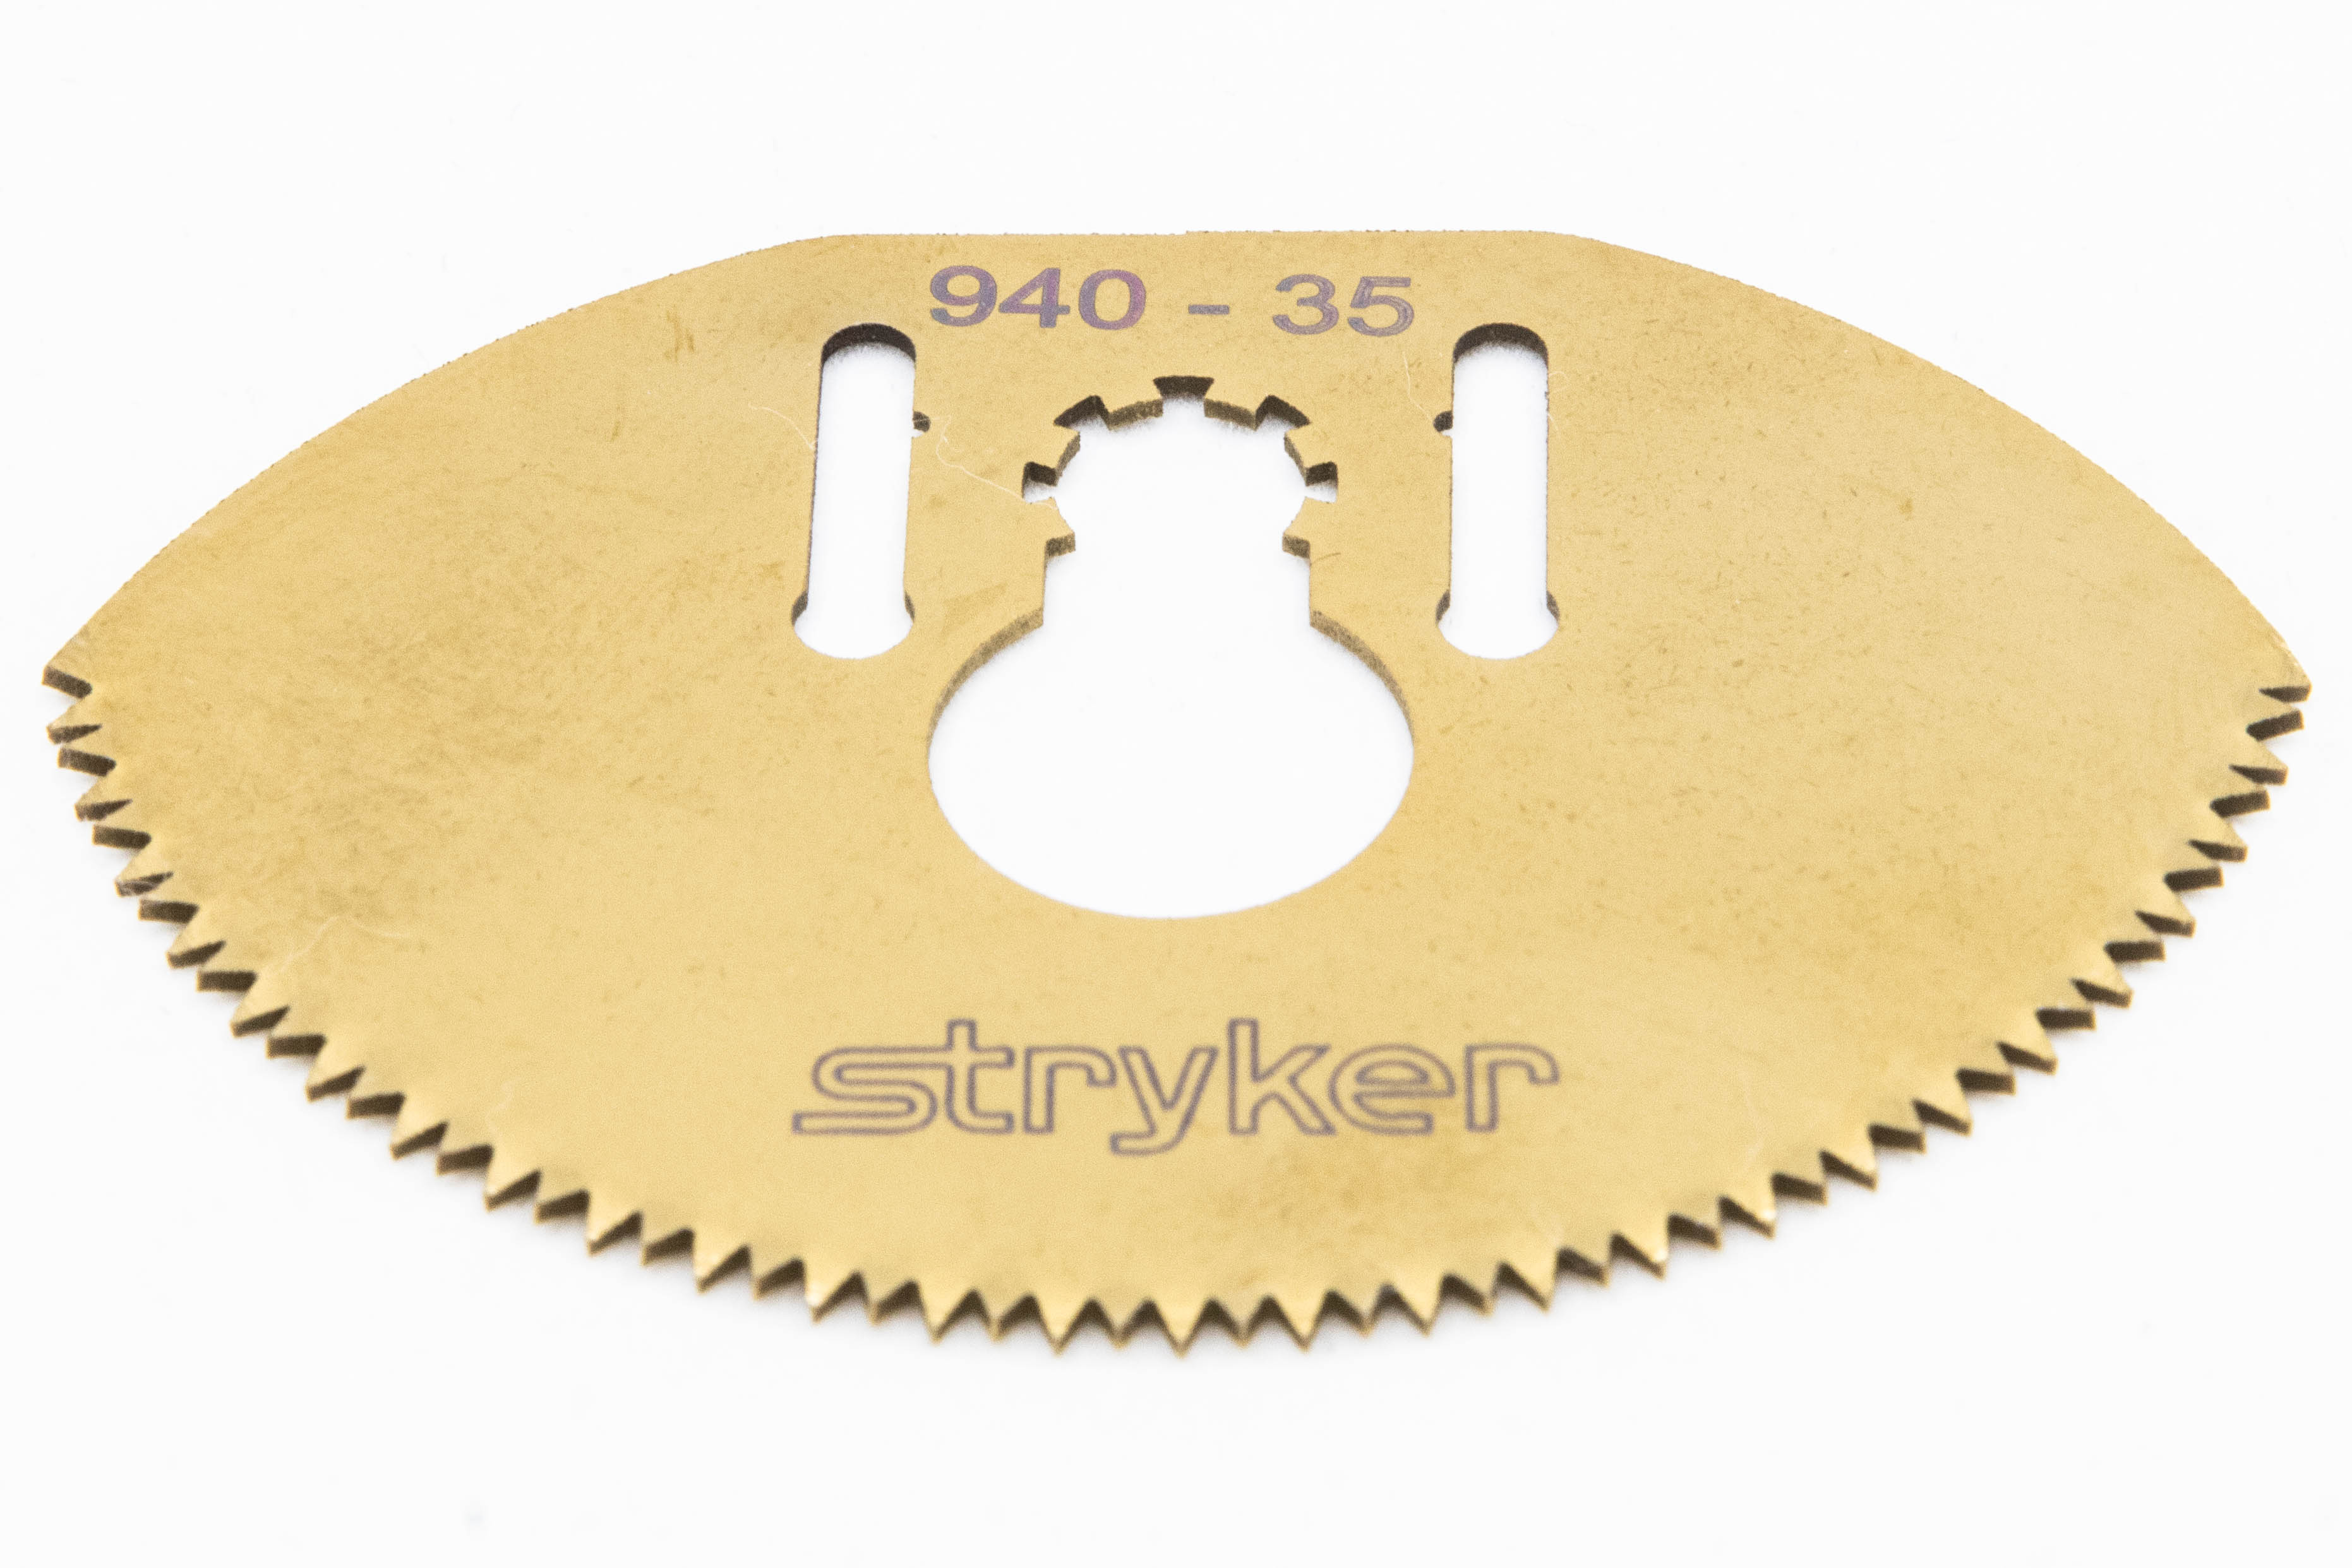 Stryker 940-35 Titanium Nitrided Replacement Cast Saw Blade